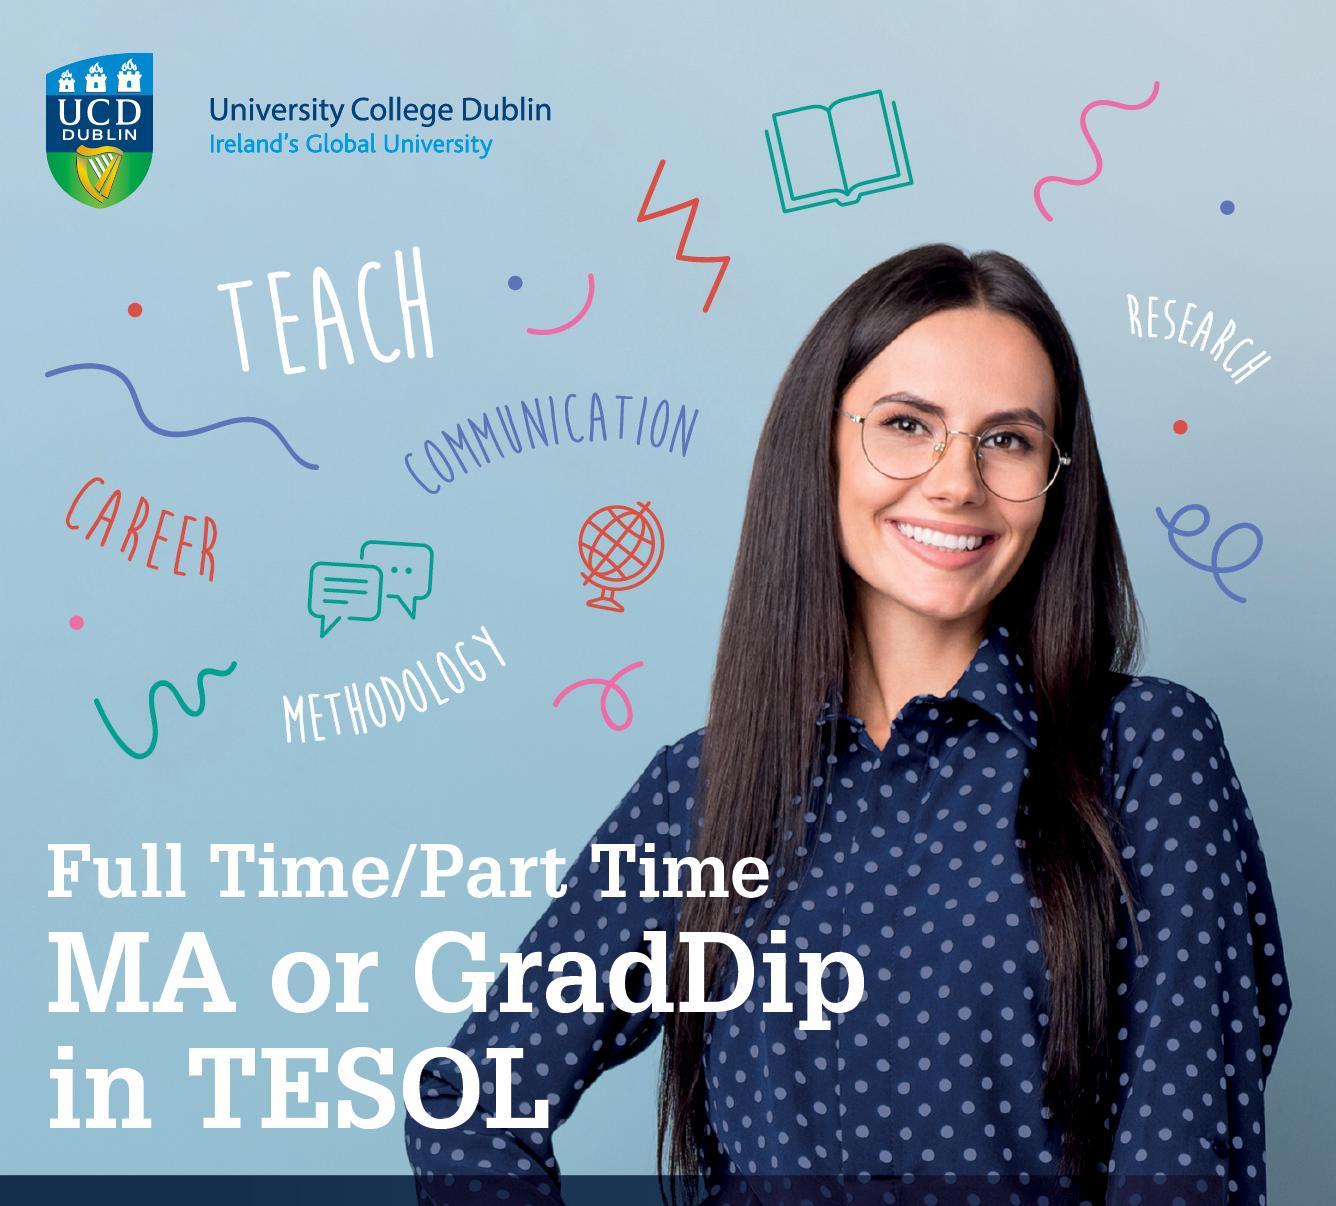 Thinking of applying for an MA or Grad Dip in TESOL (Teaching English to speakers of other languages)? 